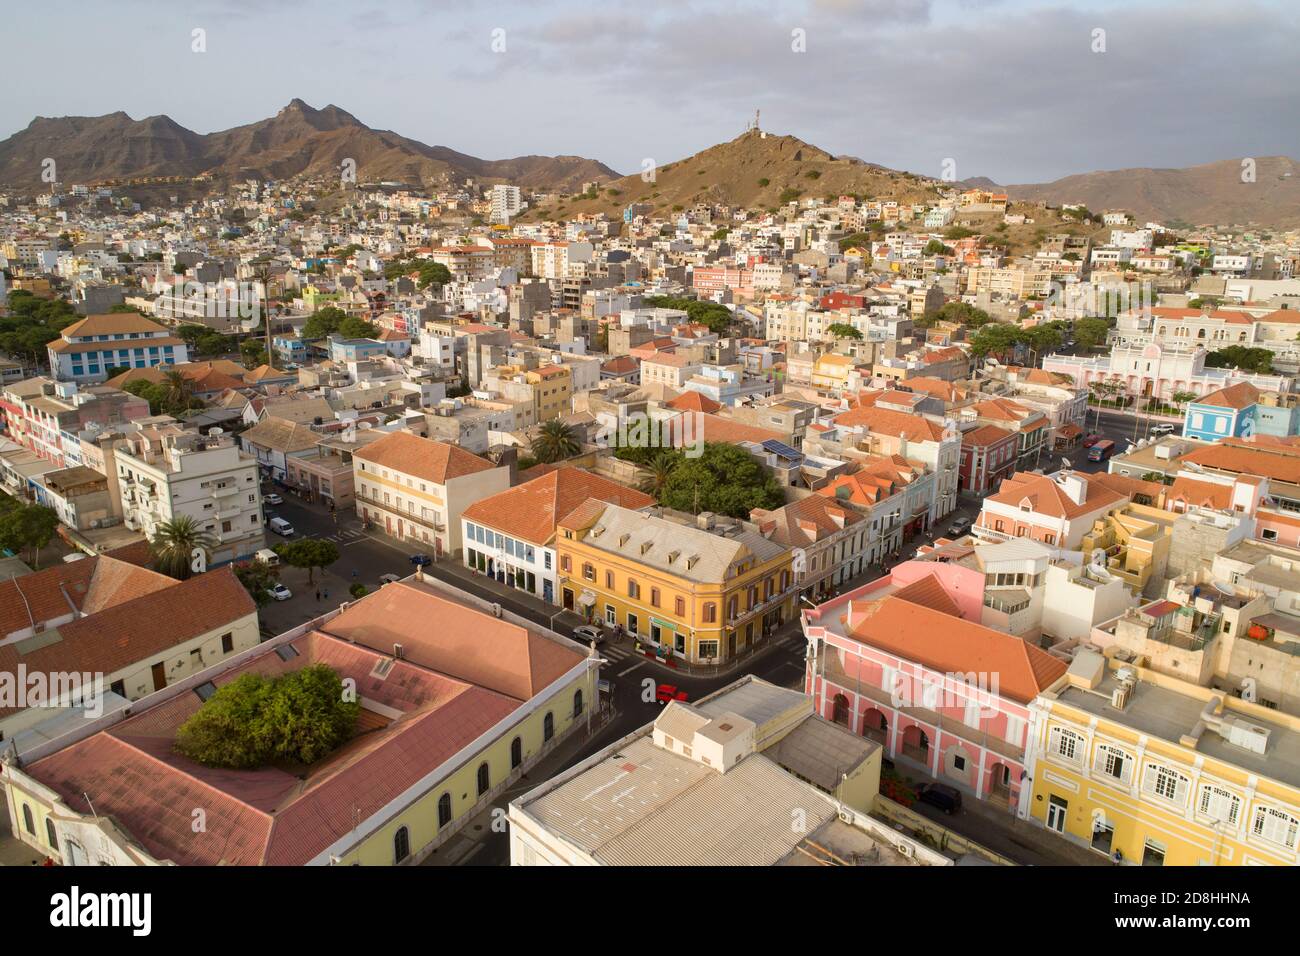 Mindelo is the vibrant, colorful capital of Sao Vicente, Cabo Verde. Stock Photo